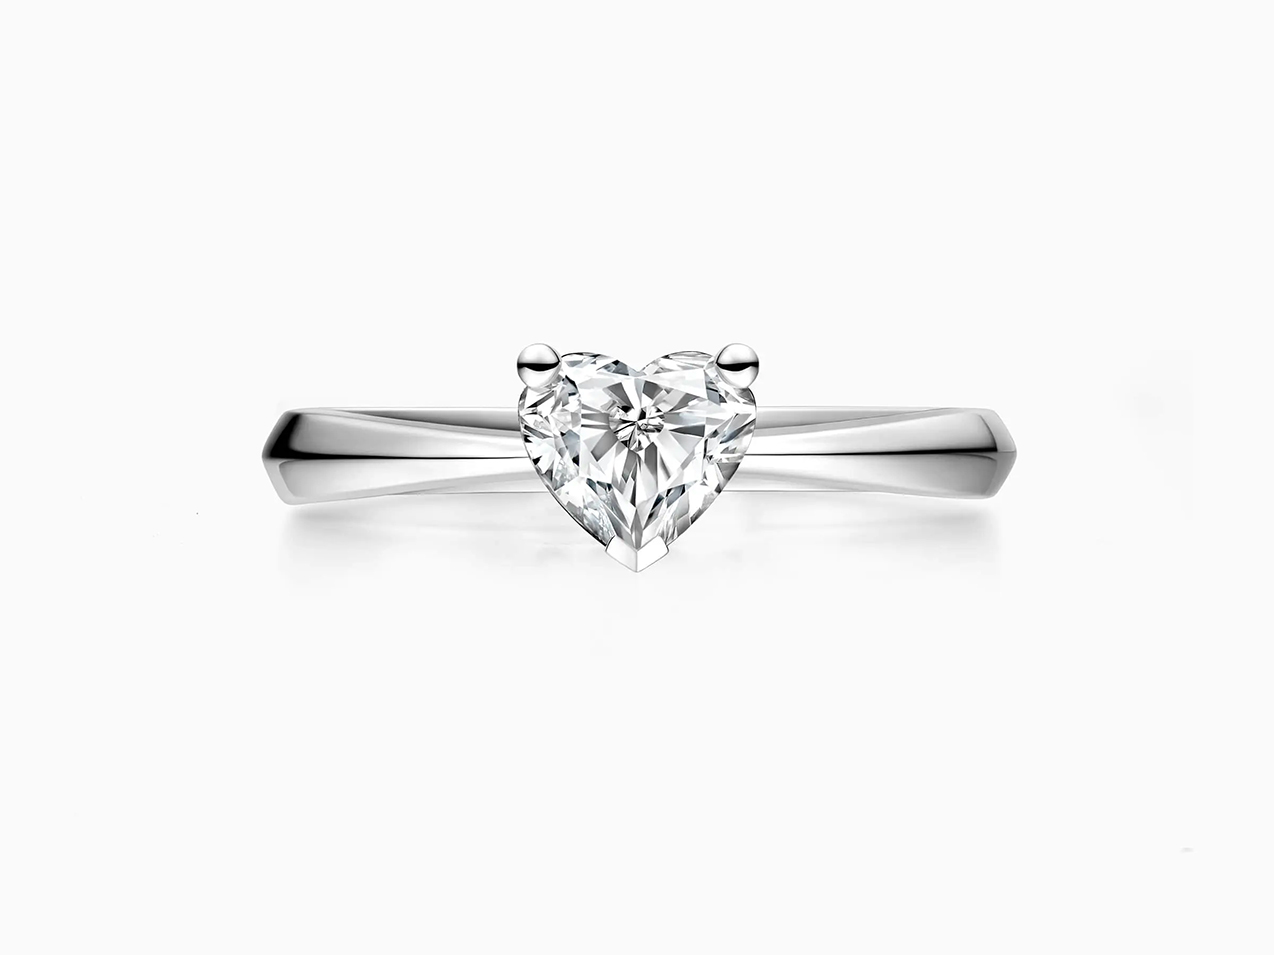 heart shaped engagement ring